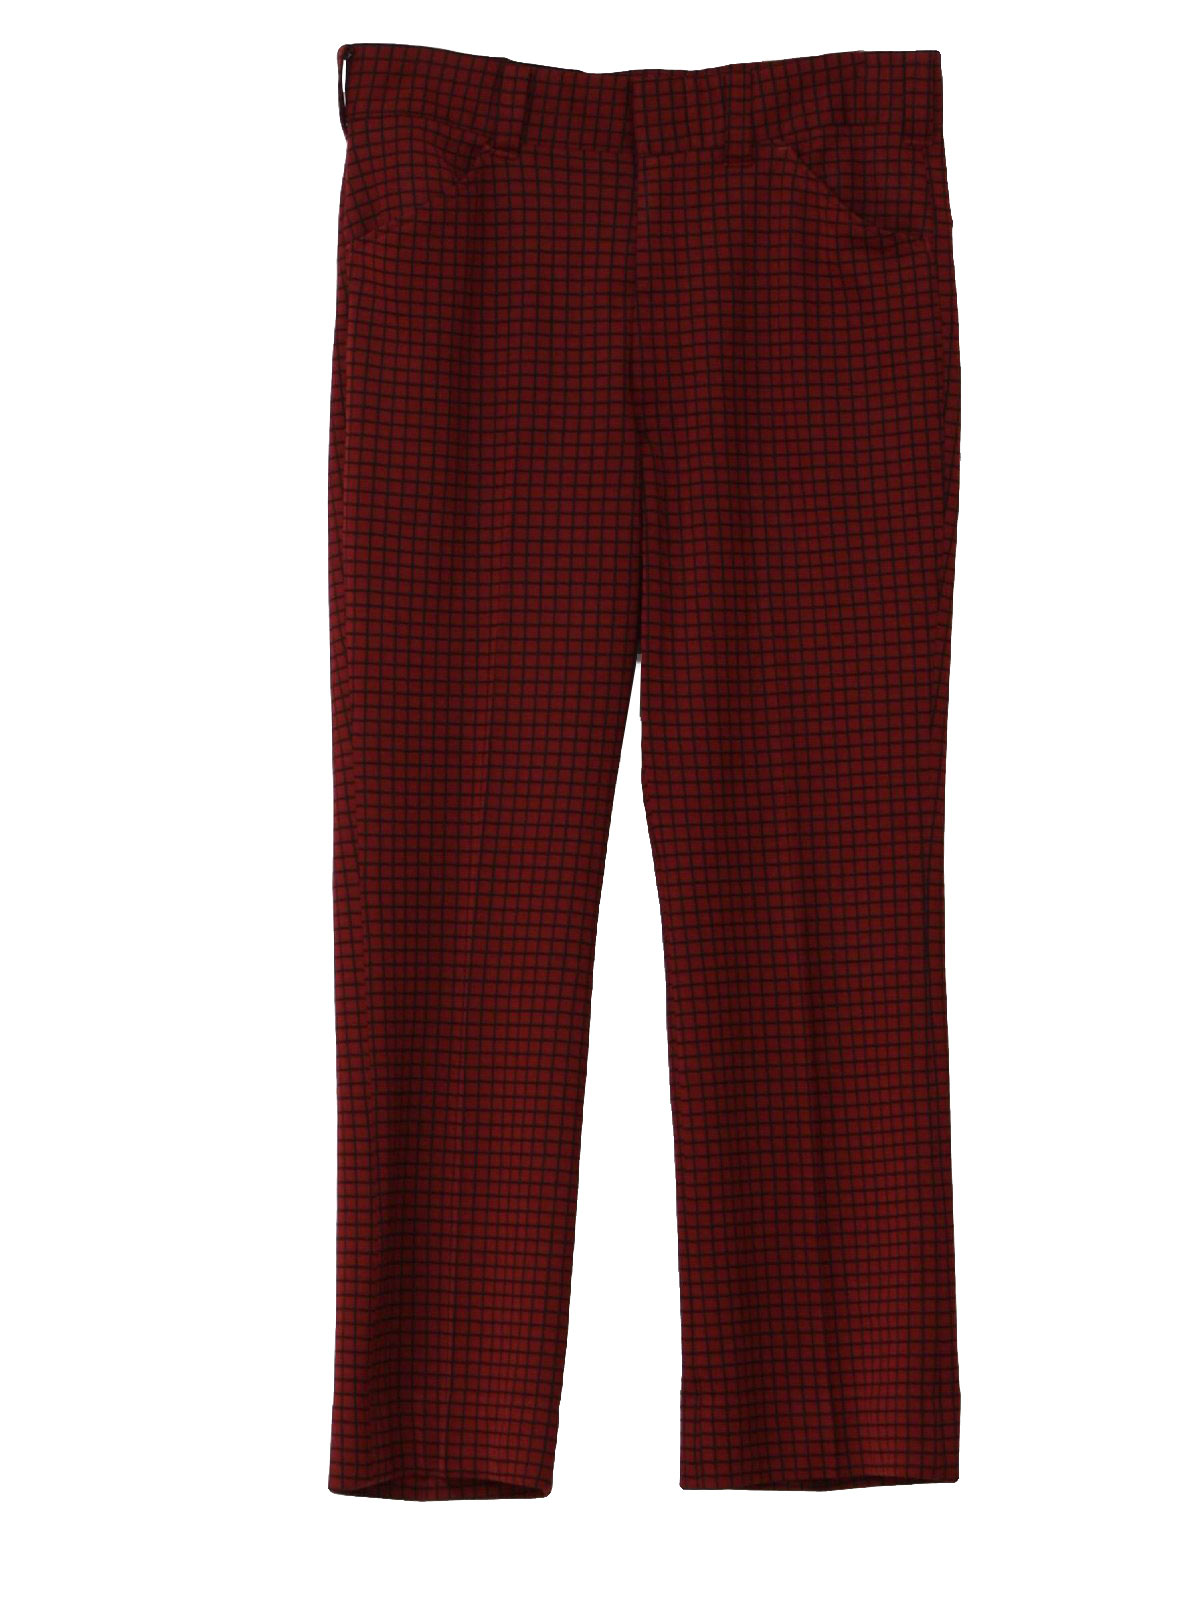 Seventies 100% Polyester Flared Pants / Flares: 70s -100% Polyester ...